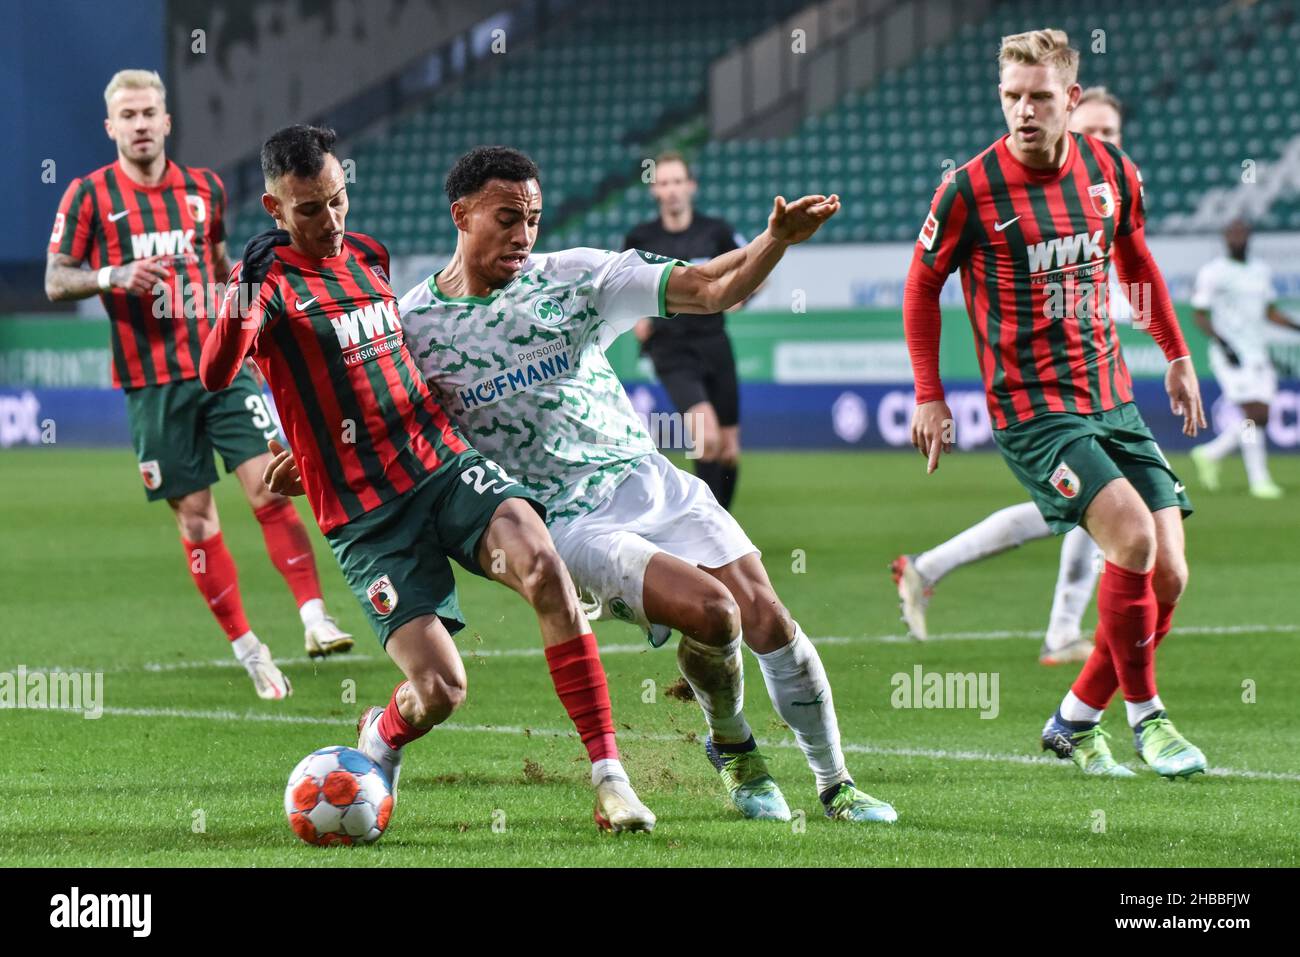 Fuerth, Germany. 18th Dec, 2021.  Fussball, 1.Bundesliga - SpVgg Greuther Fuerth vs. FC Augsburg  Image: (fLTR) Amaral Borduchi Lago (FC Augsburg, 22), Jamie Leweling (SpVgg Greuther Fürth,40)  DFL regulations prohibit any use of photographs as image sequences and or quasi-video Credit: Ryan Evans/Alamy Live News Stock Photo